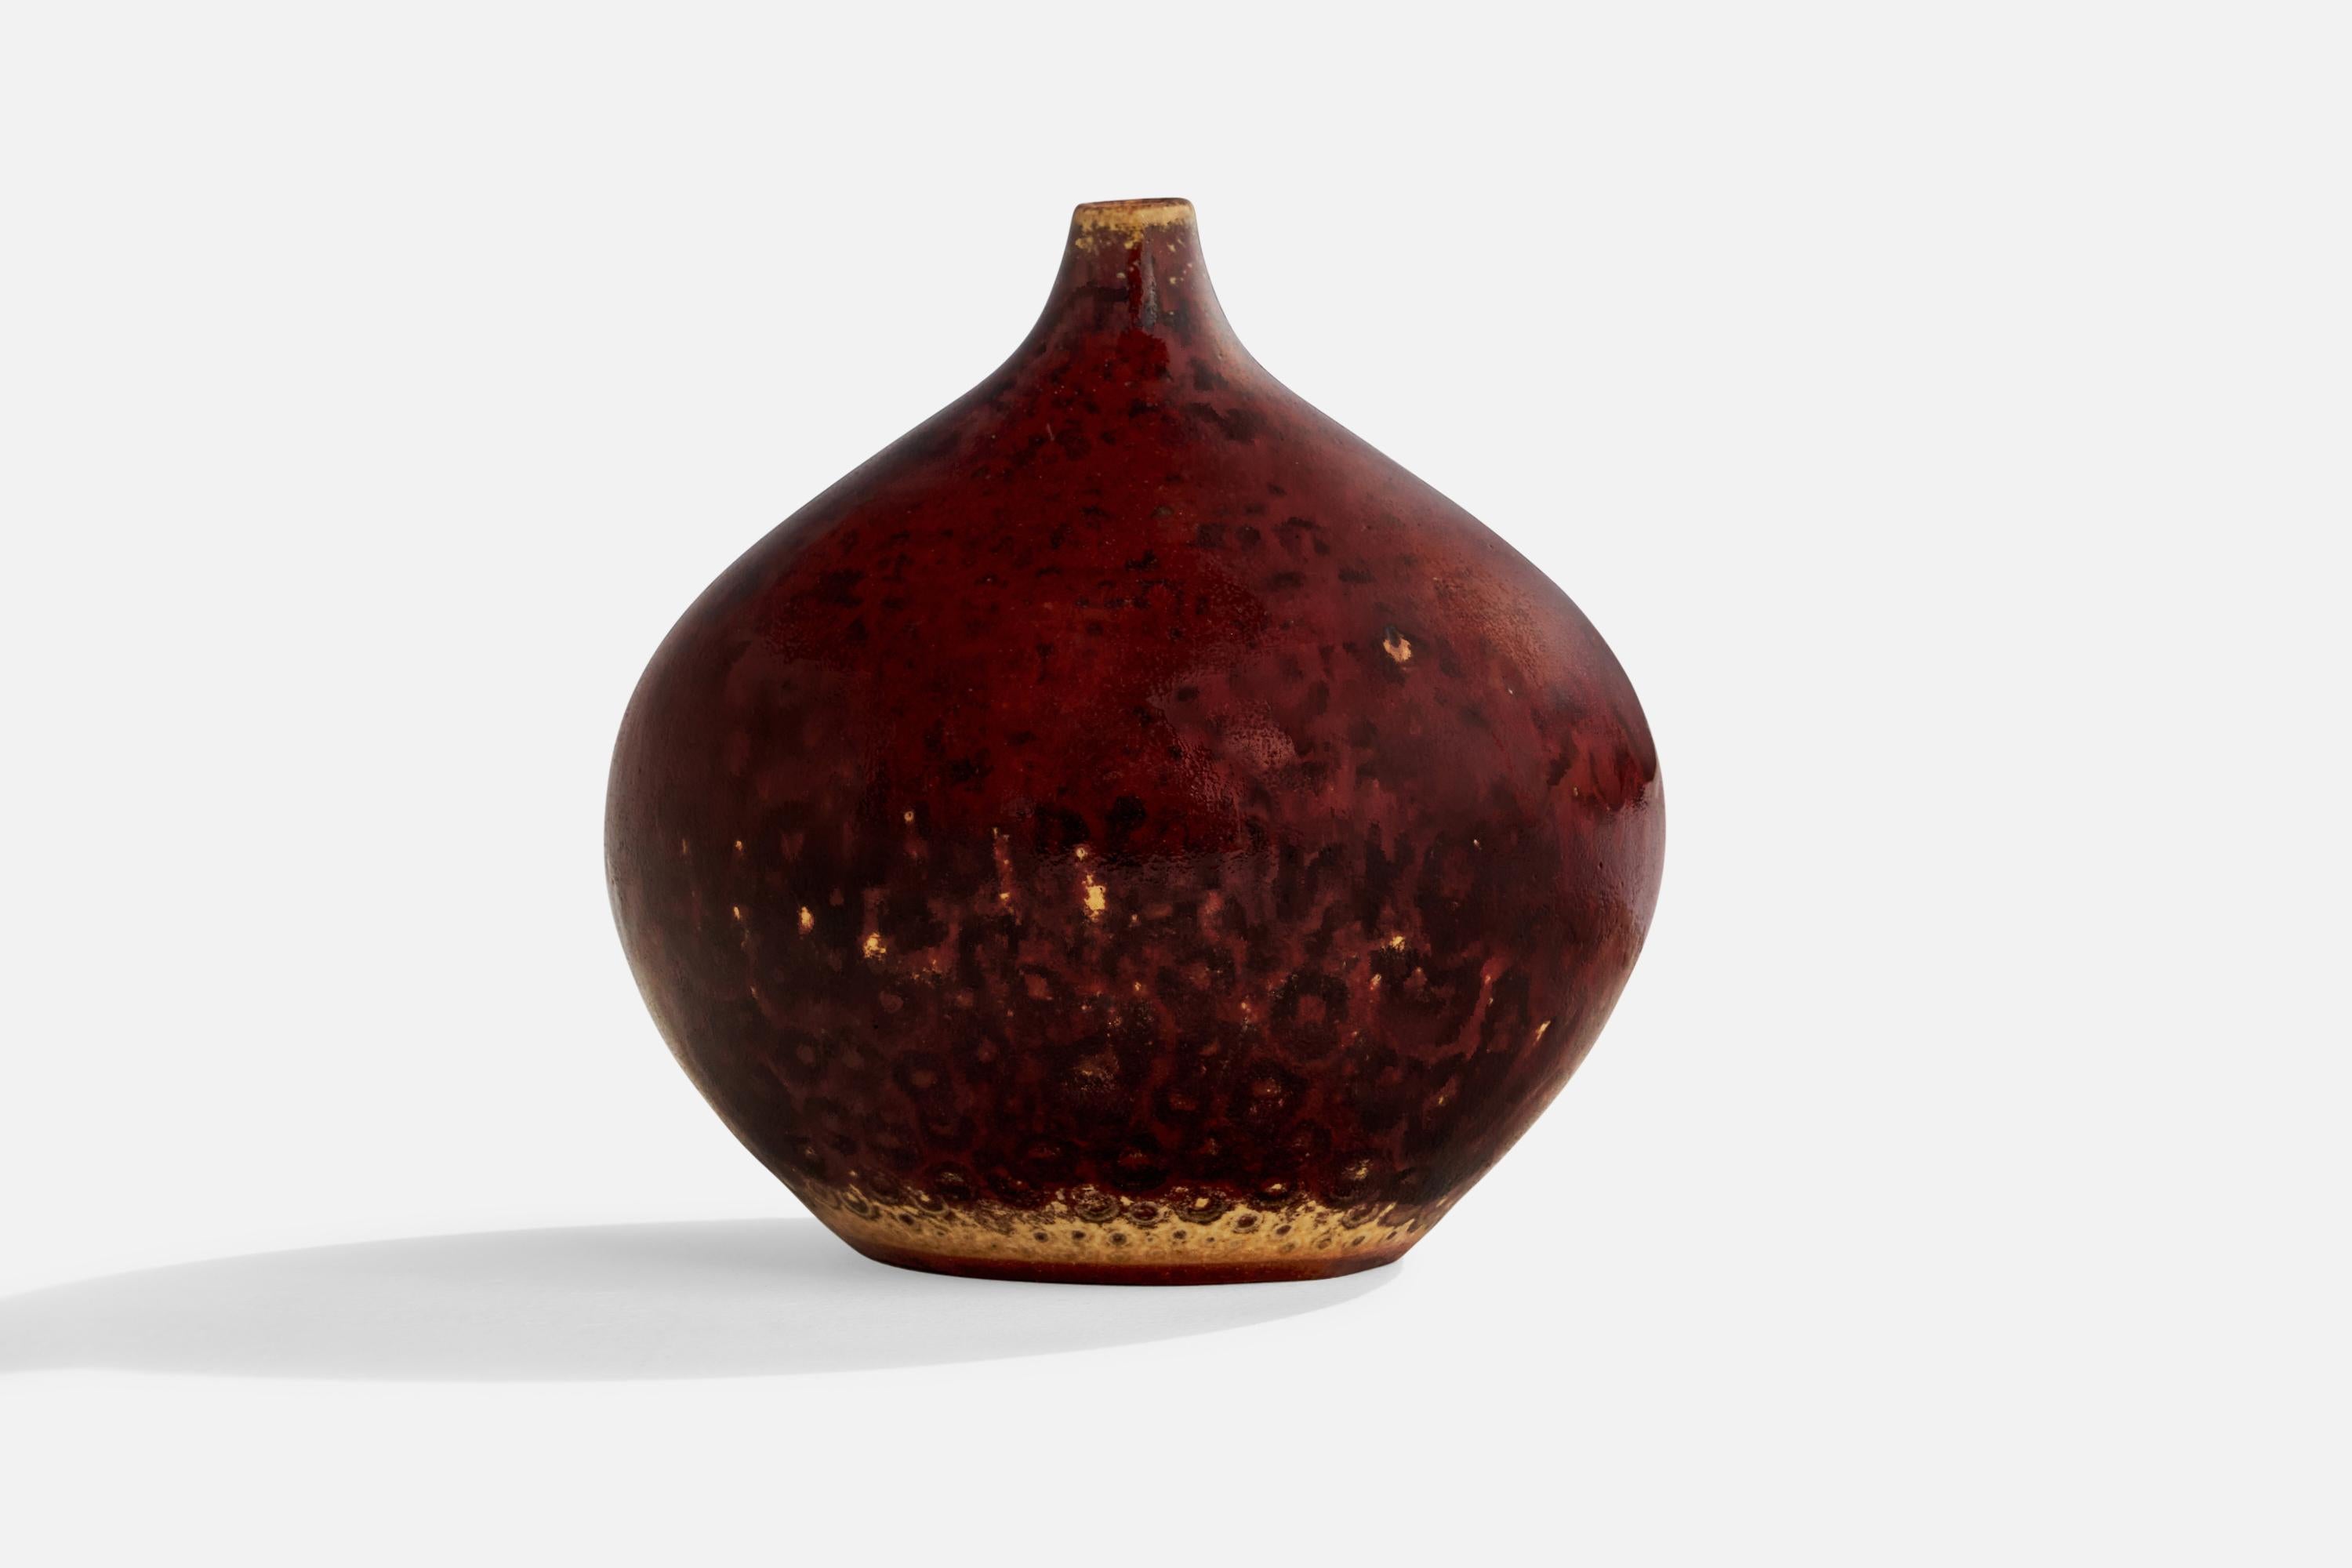 A red-glazed stoneware vase designed and produced by Yngve Blixt, Sweden, c. 1960s.